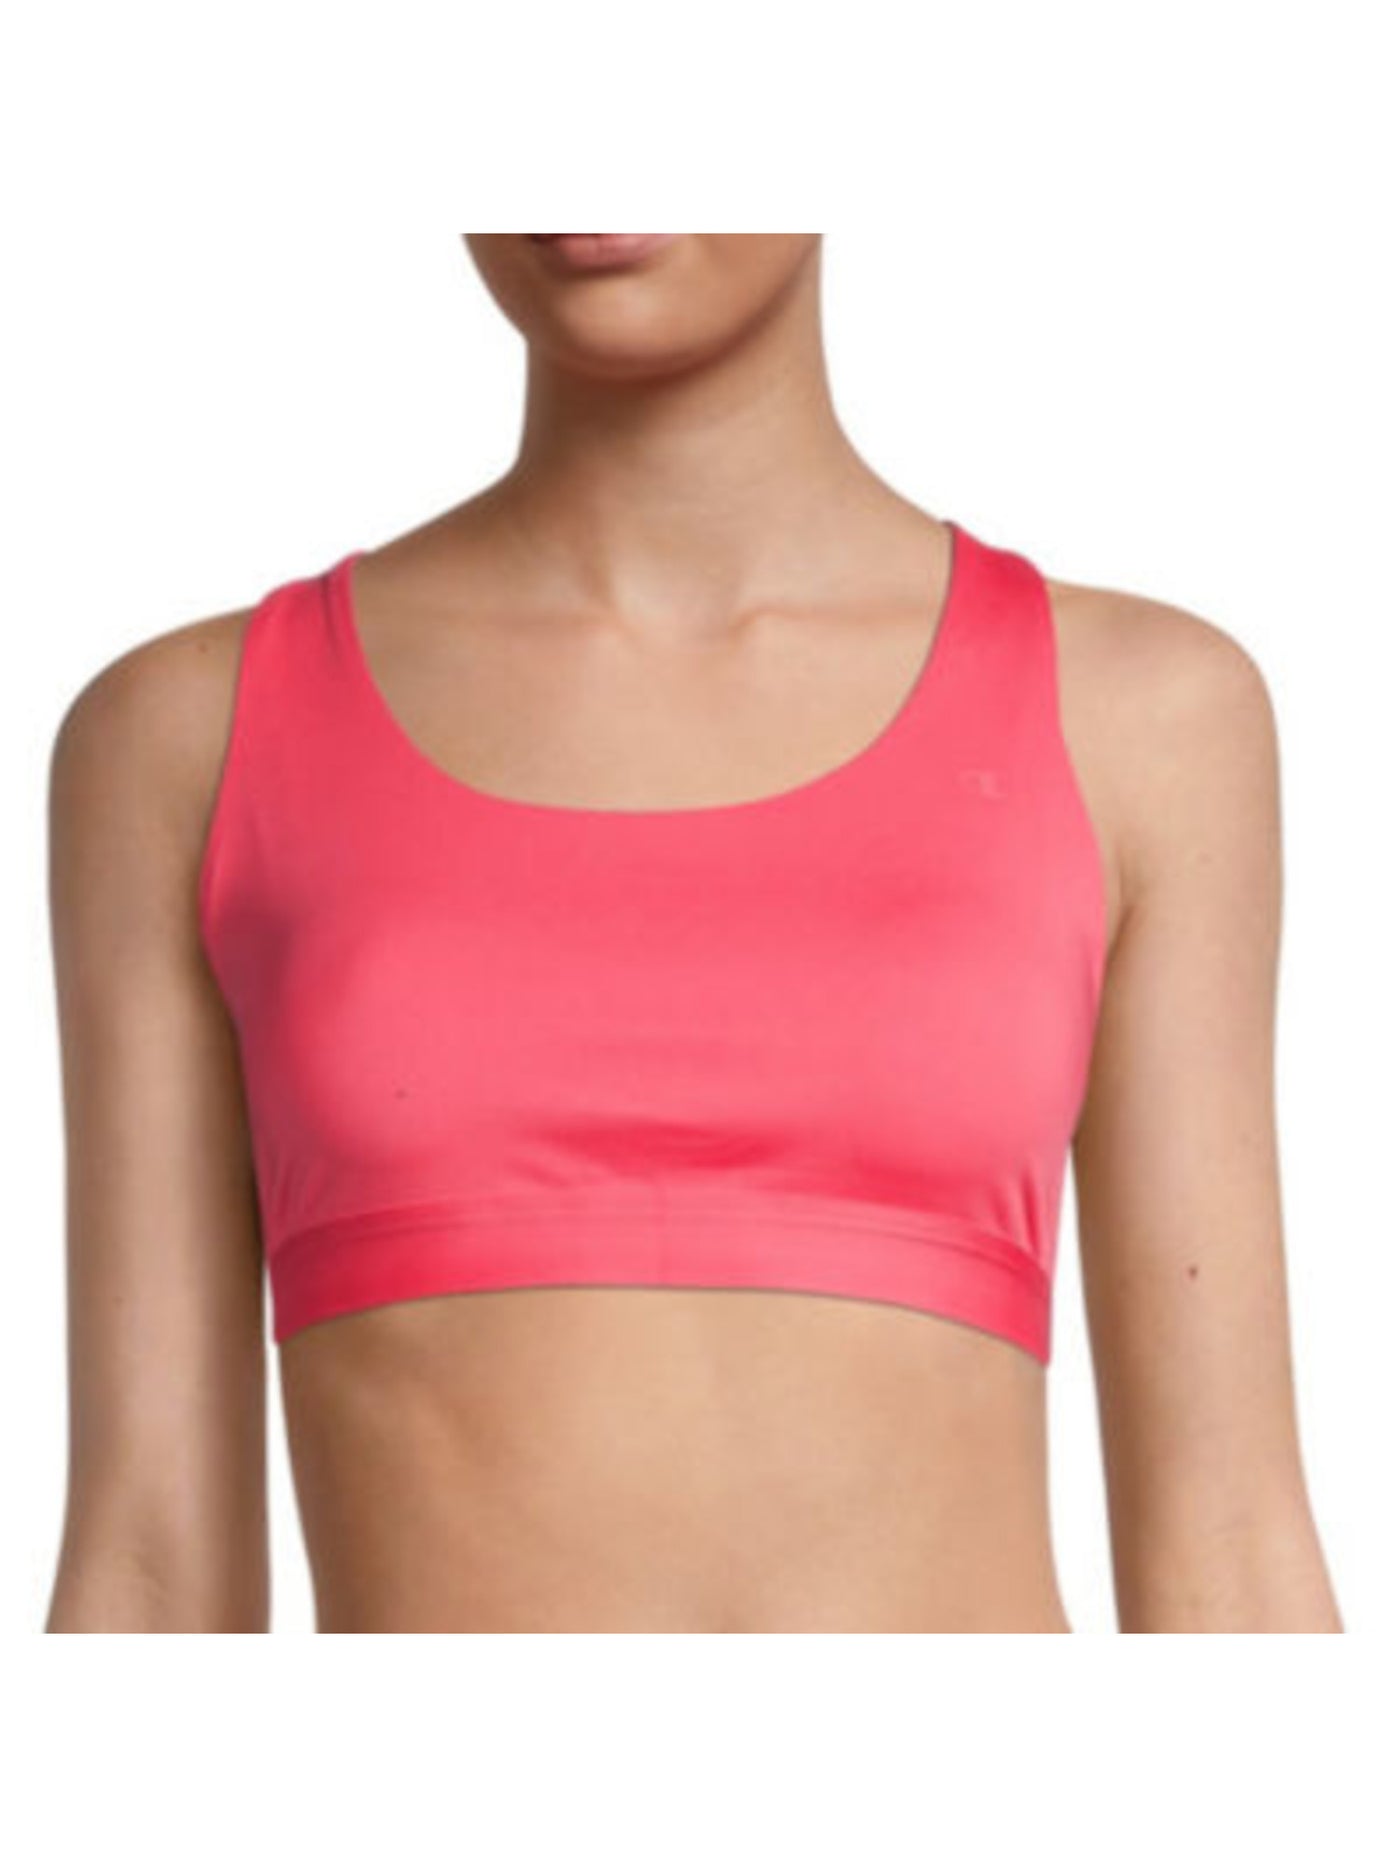 CHAMPION Intimates Pink Stretch Racerback Cut Out Sports Bra S